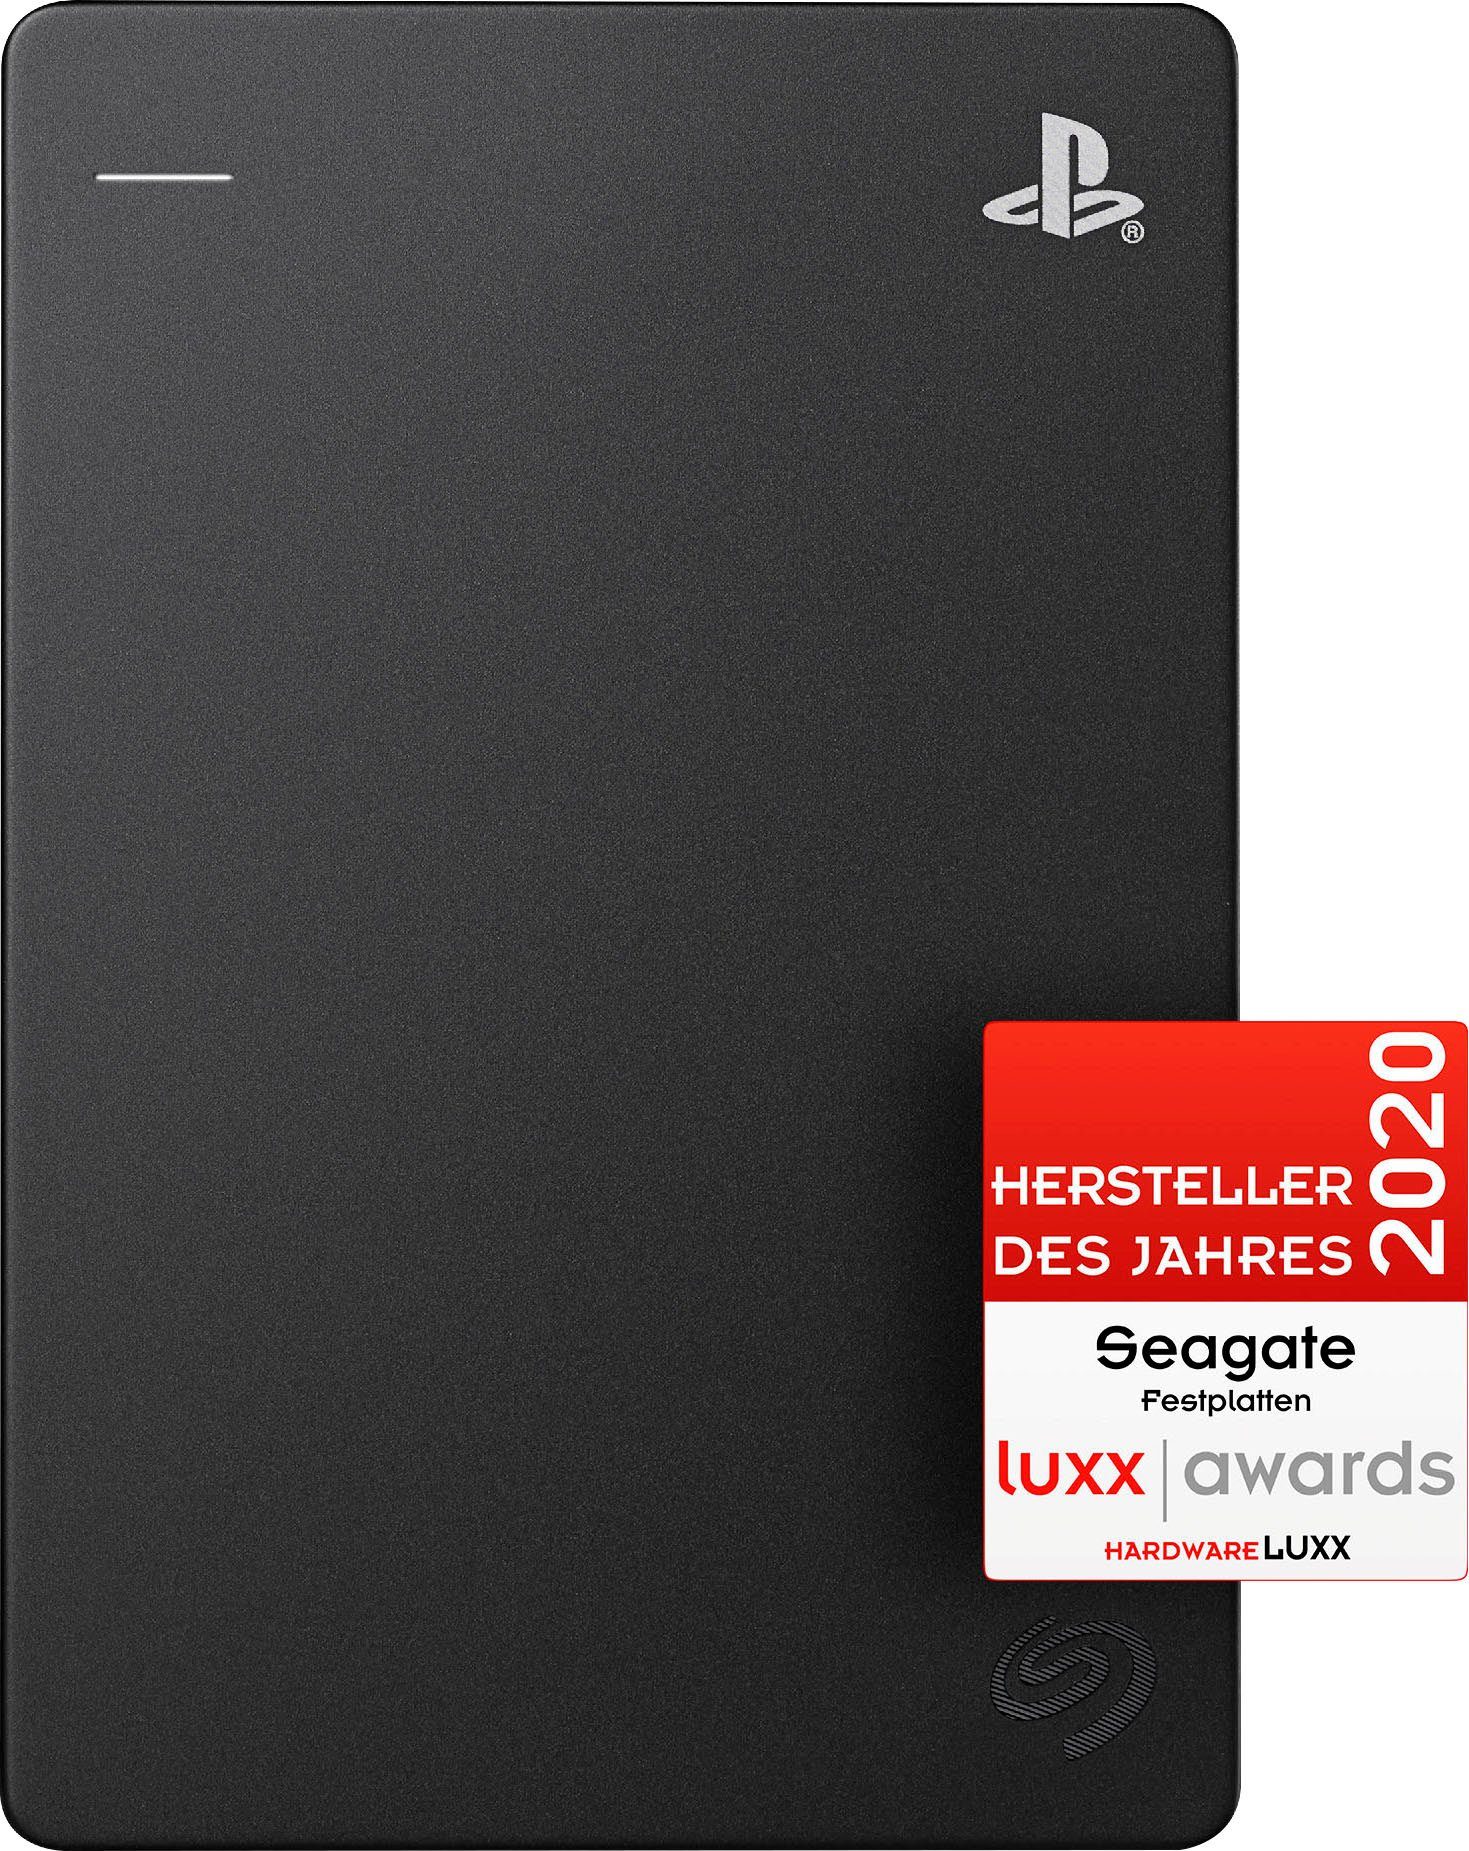 Seagate »Game Drive PS4 STGD2000200« externe Gaming-Festplatte (2 TB) 2,5"  online kaufen | OTTO